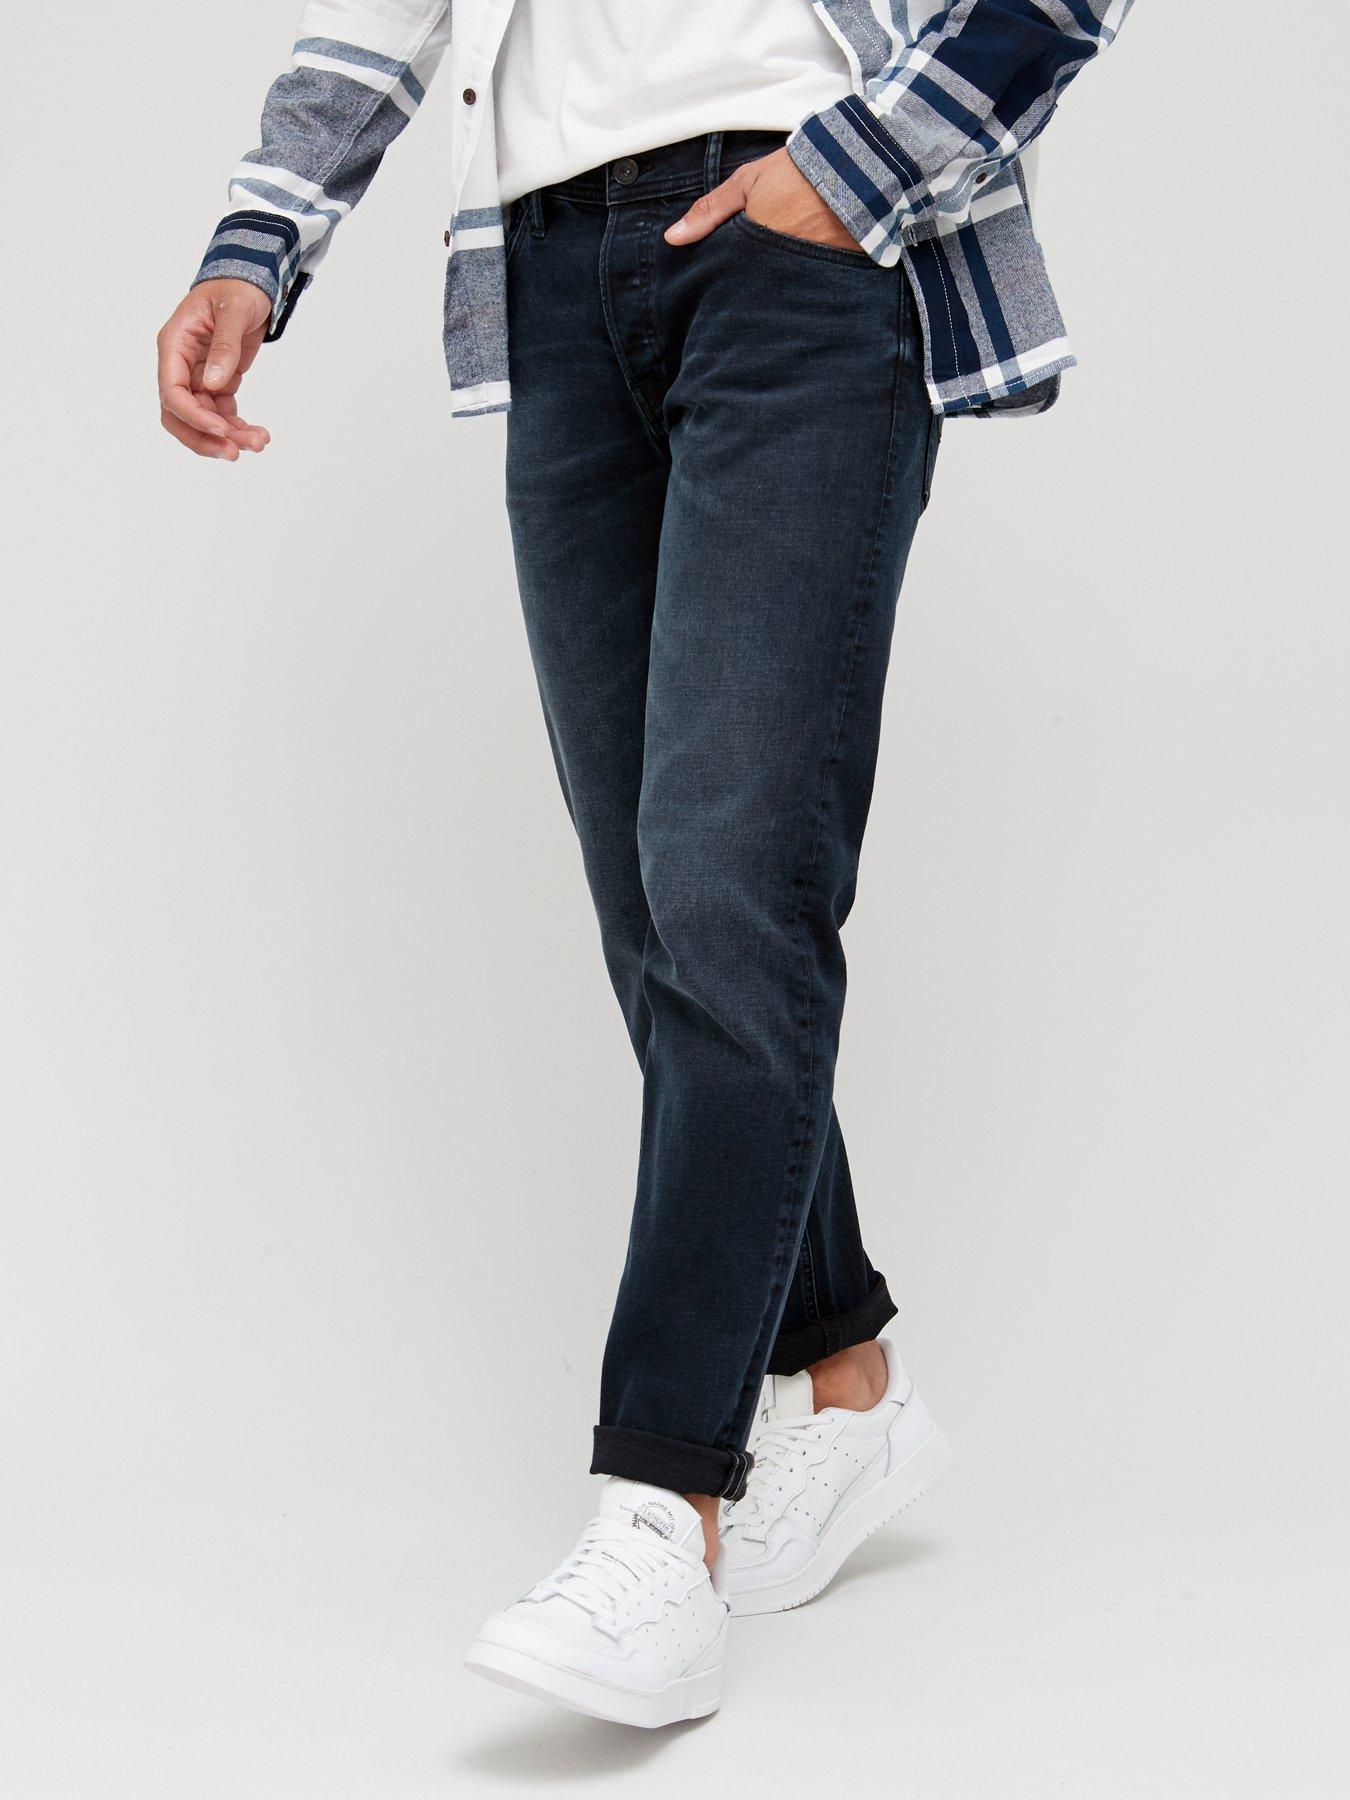 Jeans Mike Straight Fit Jeans - Blue/Black